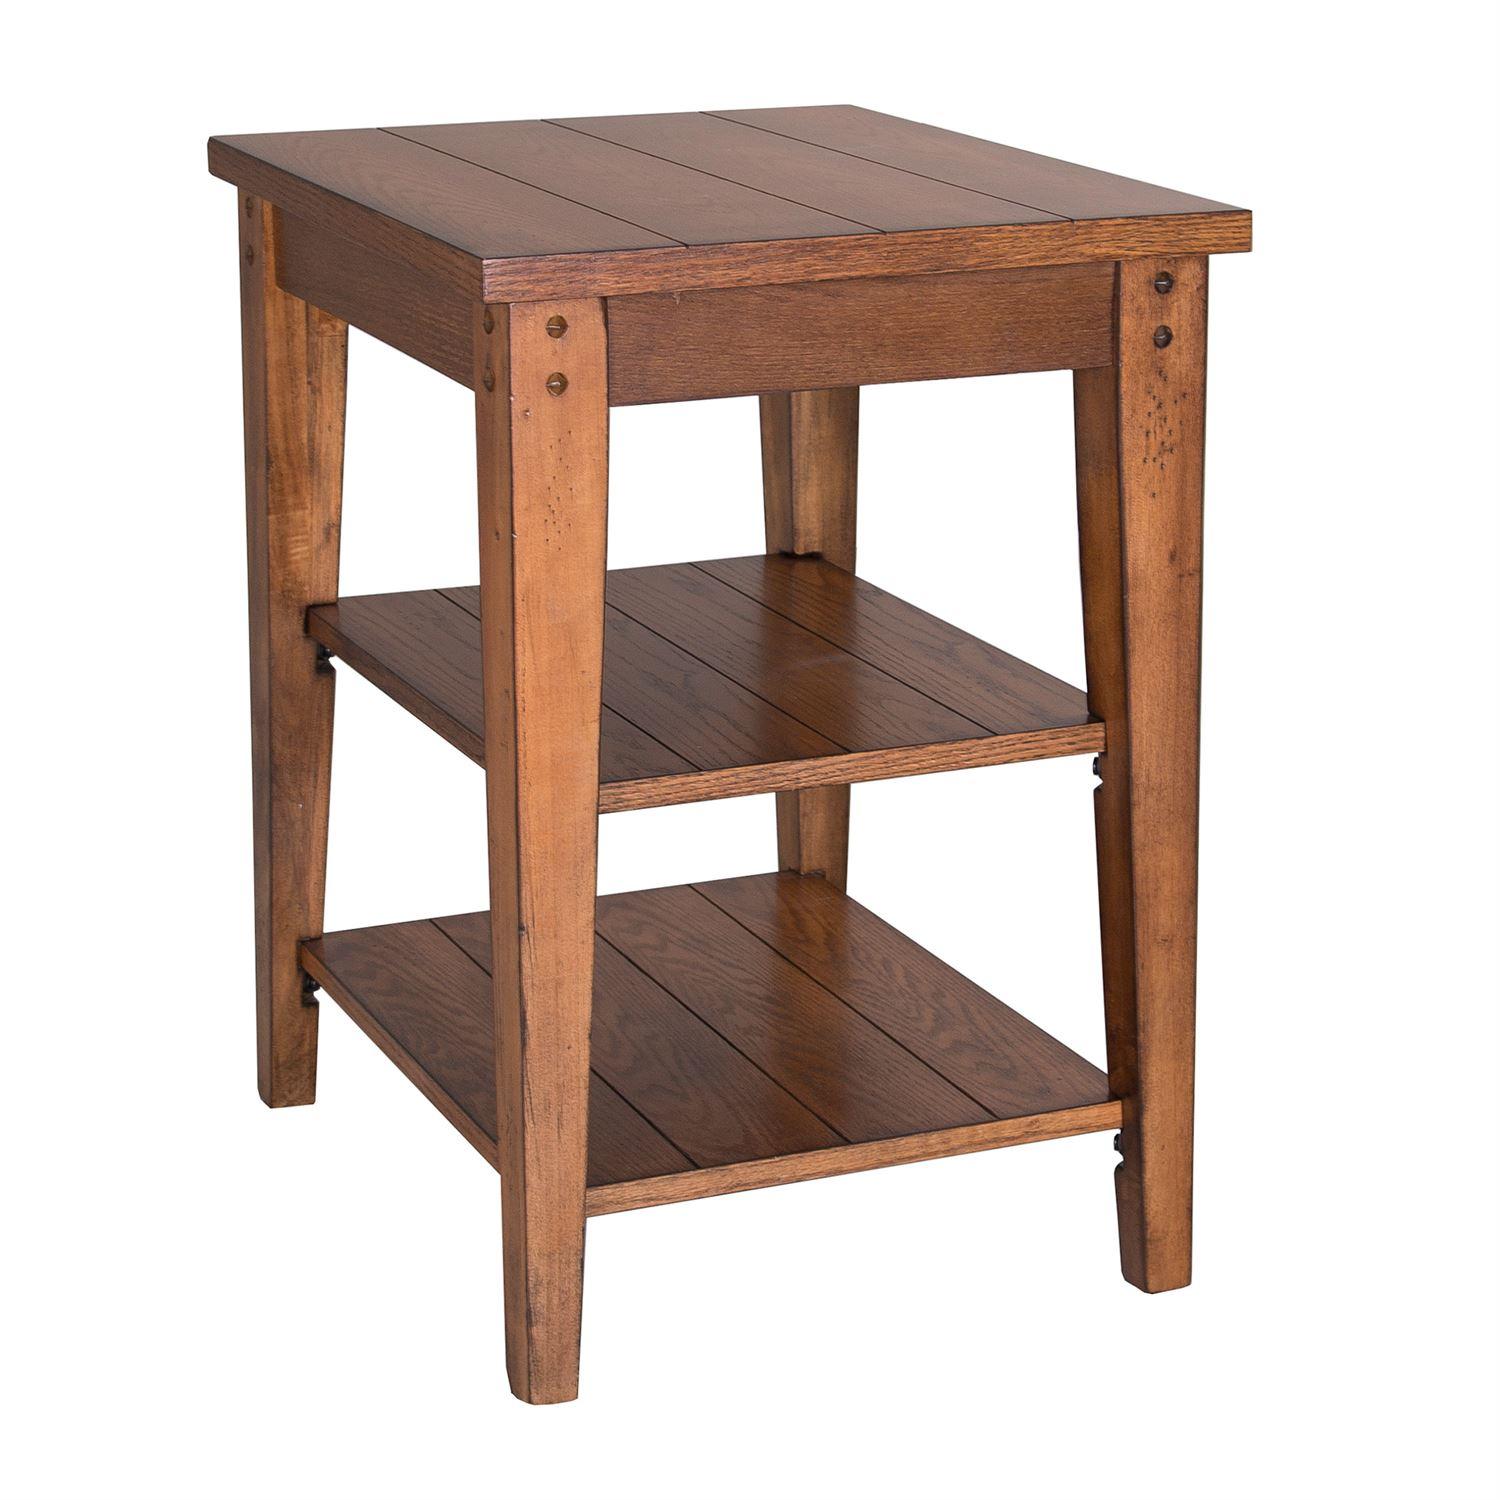 Rustic End Table Lake House  (110-OT) End Table 110-OT1022 in Brown, Oak Veneers Lacquer